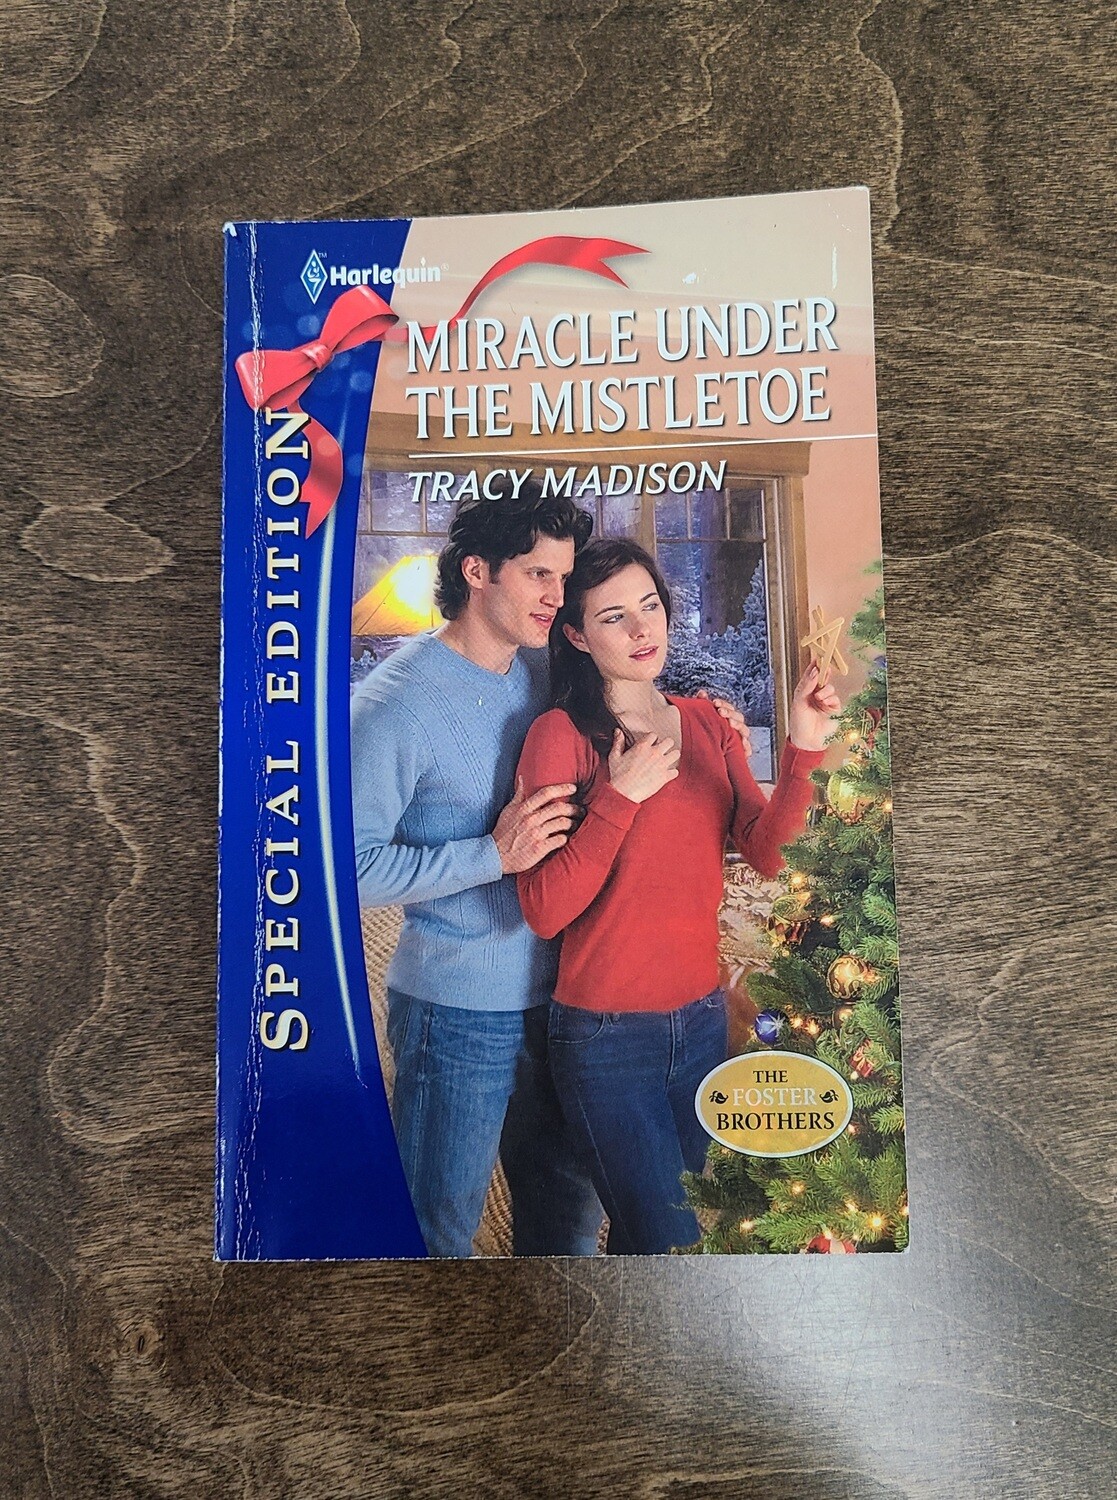 Miracle Under the Mistletoe by Tracy Madison